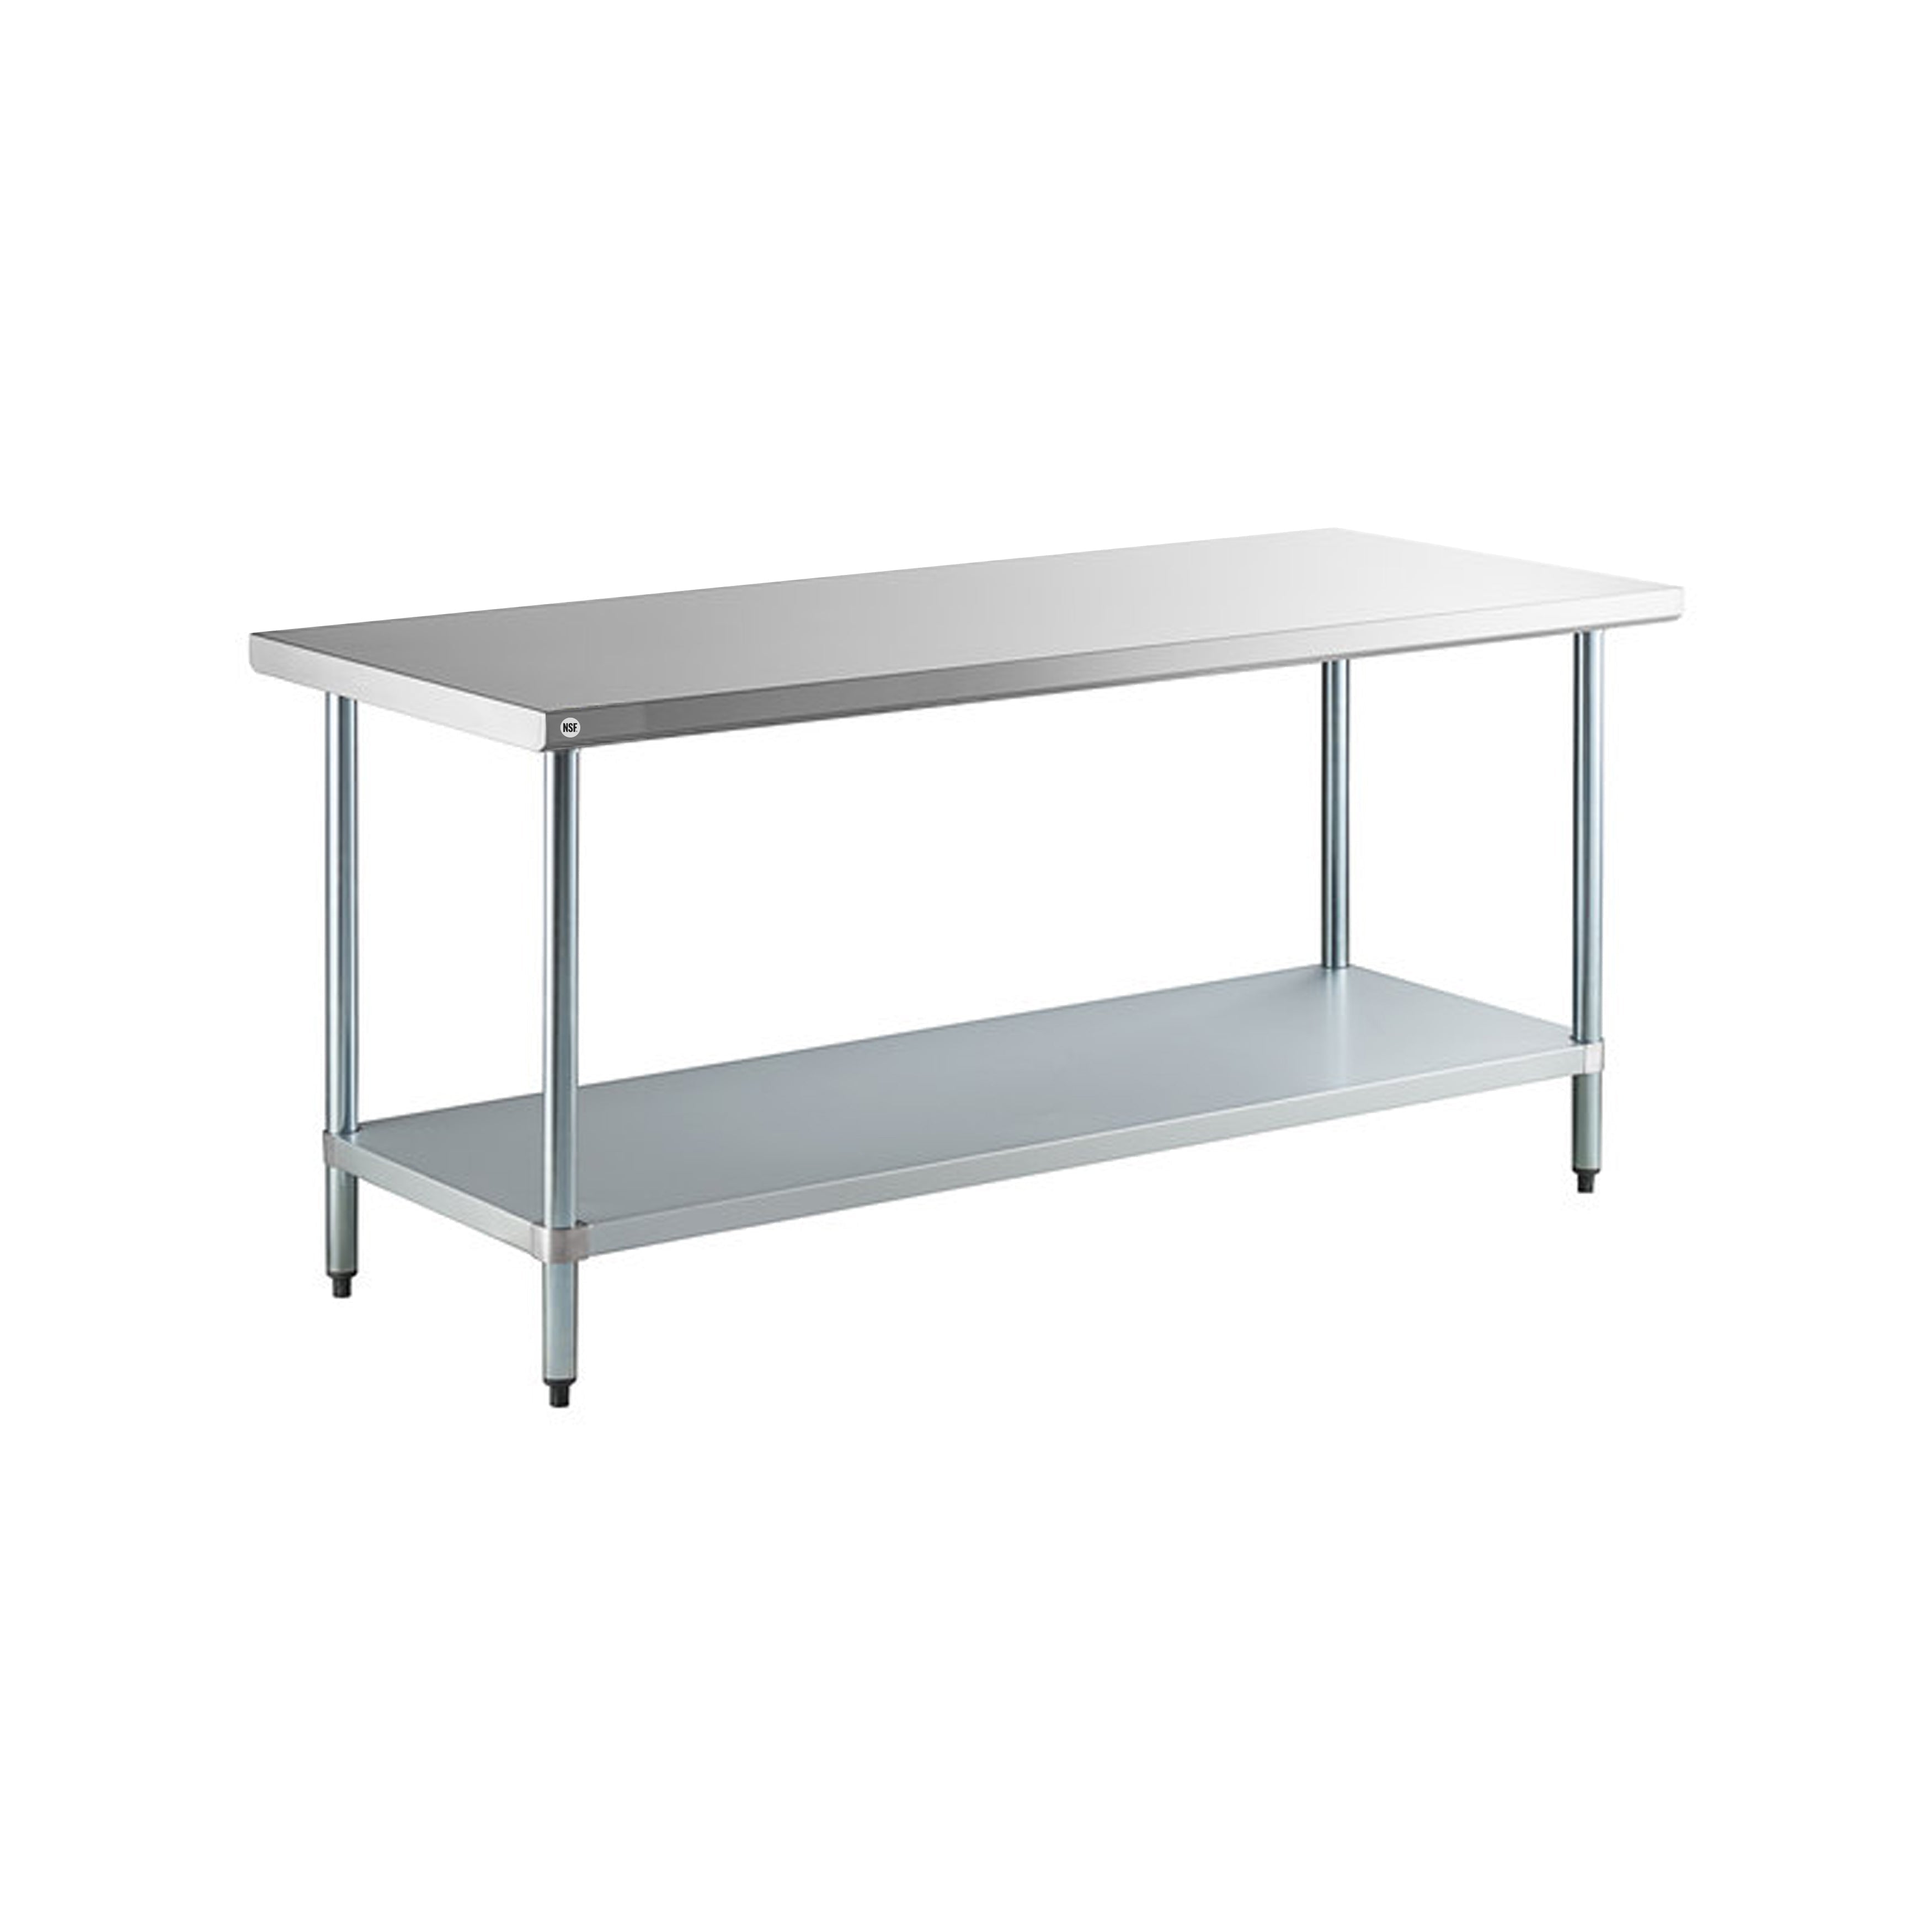 Omcan - 22074, Commercial 30" x 60" Stainless Steel Kitchen Work Table 1200lbs Light Duty